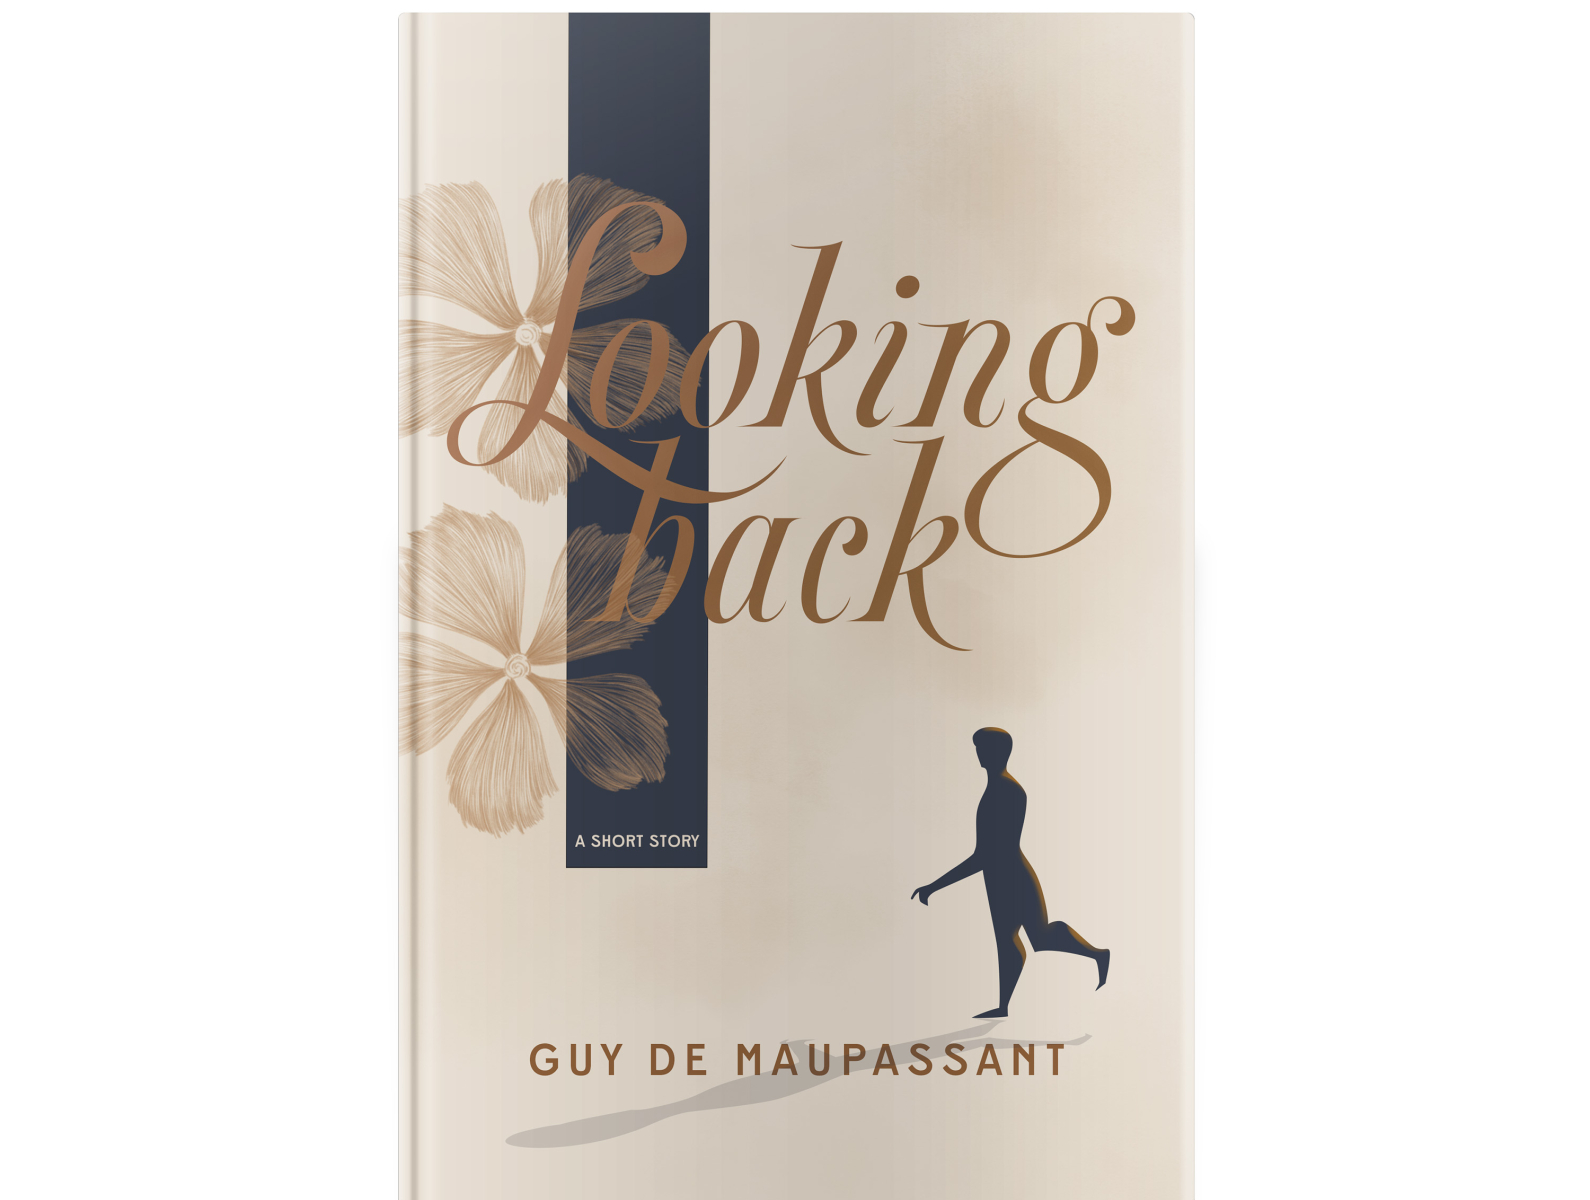 Looking Back by Guy de Maupassant book cover design illustration lettering typography